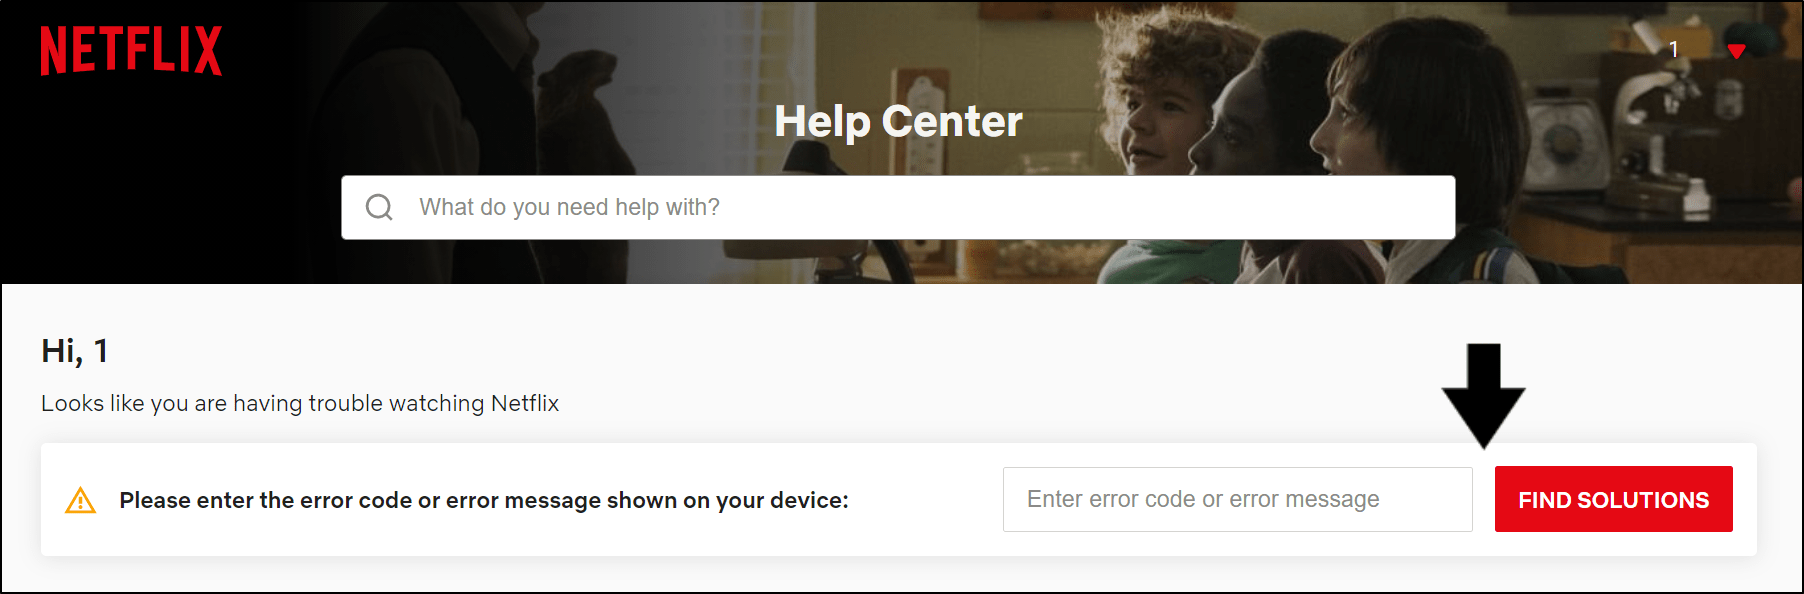 troubleshoot Netflix download error code through help center to fix downloads not working or playing